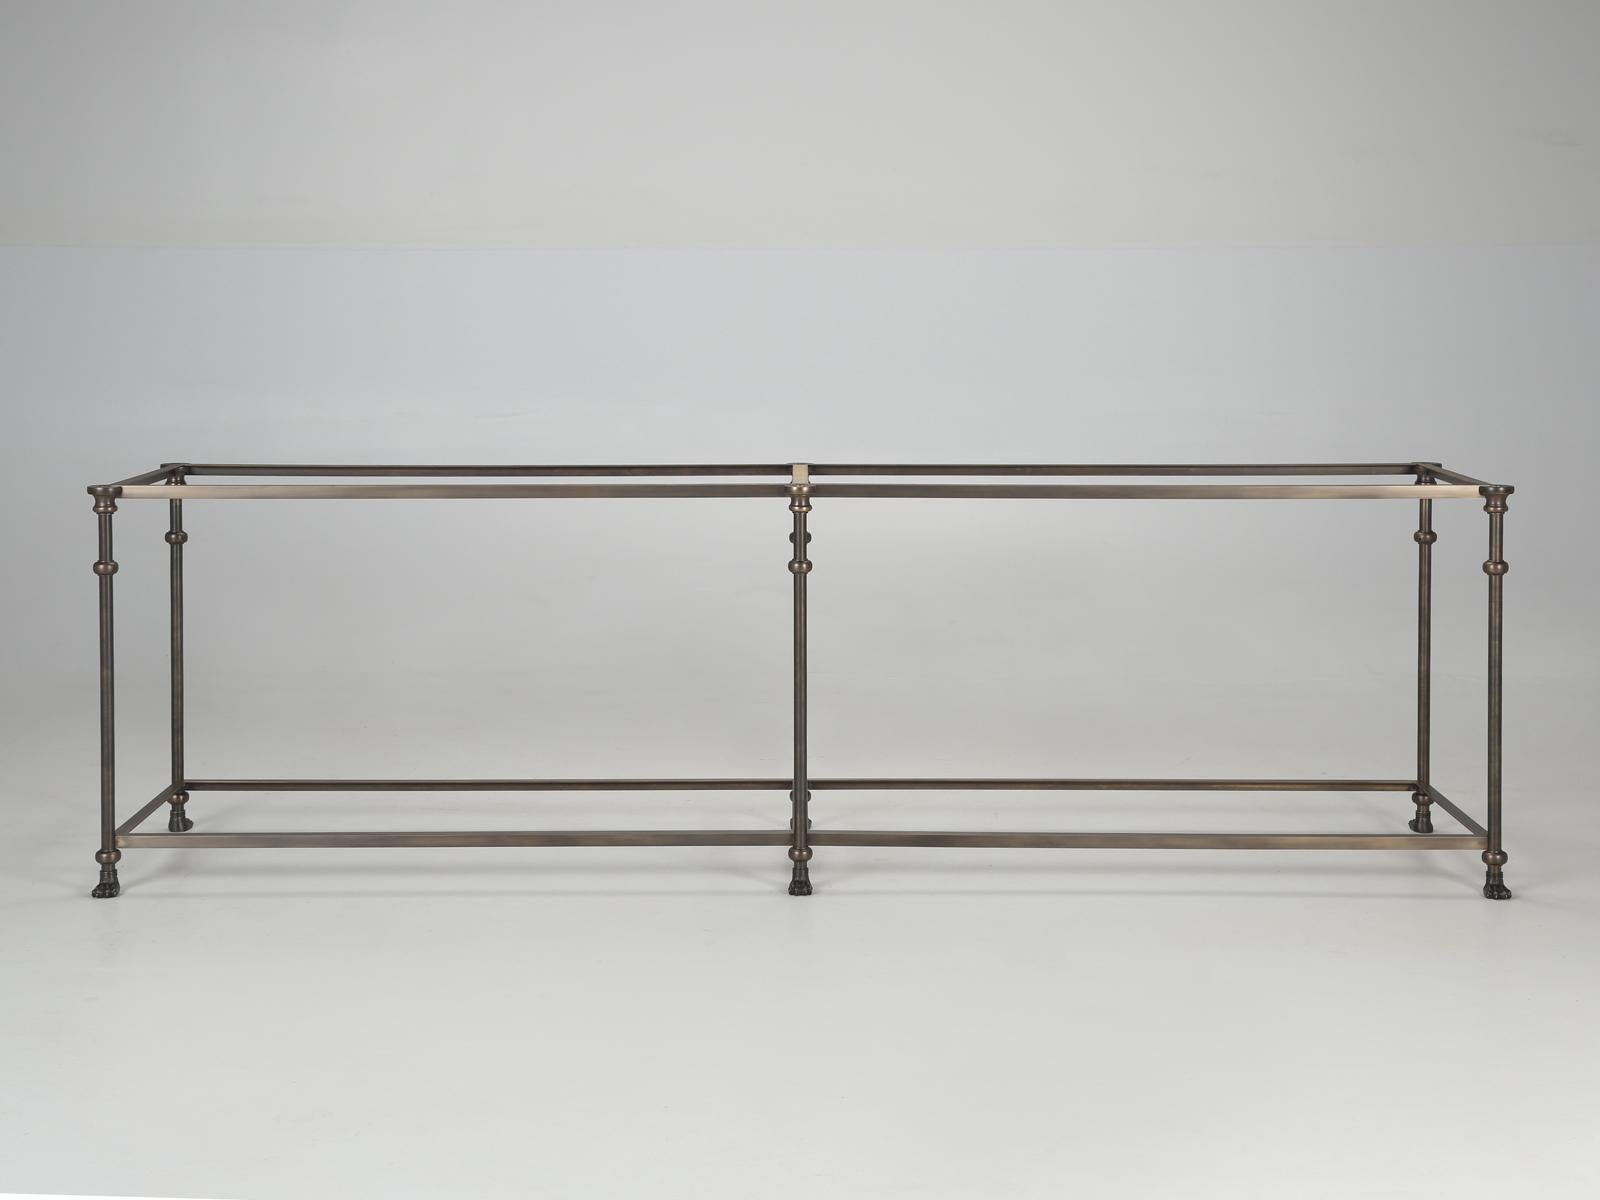 
French Industrial Inspired Solid Bronze Sofa Table, or could be a Bronze Console Table and if we built it a little higher, then the Bronze Table would be suitable for a Kitchen Island. The Sofa Table is yet another hand-made finely crafted piece of